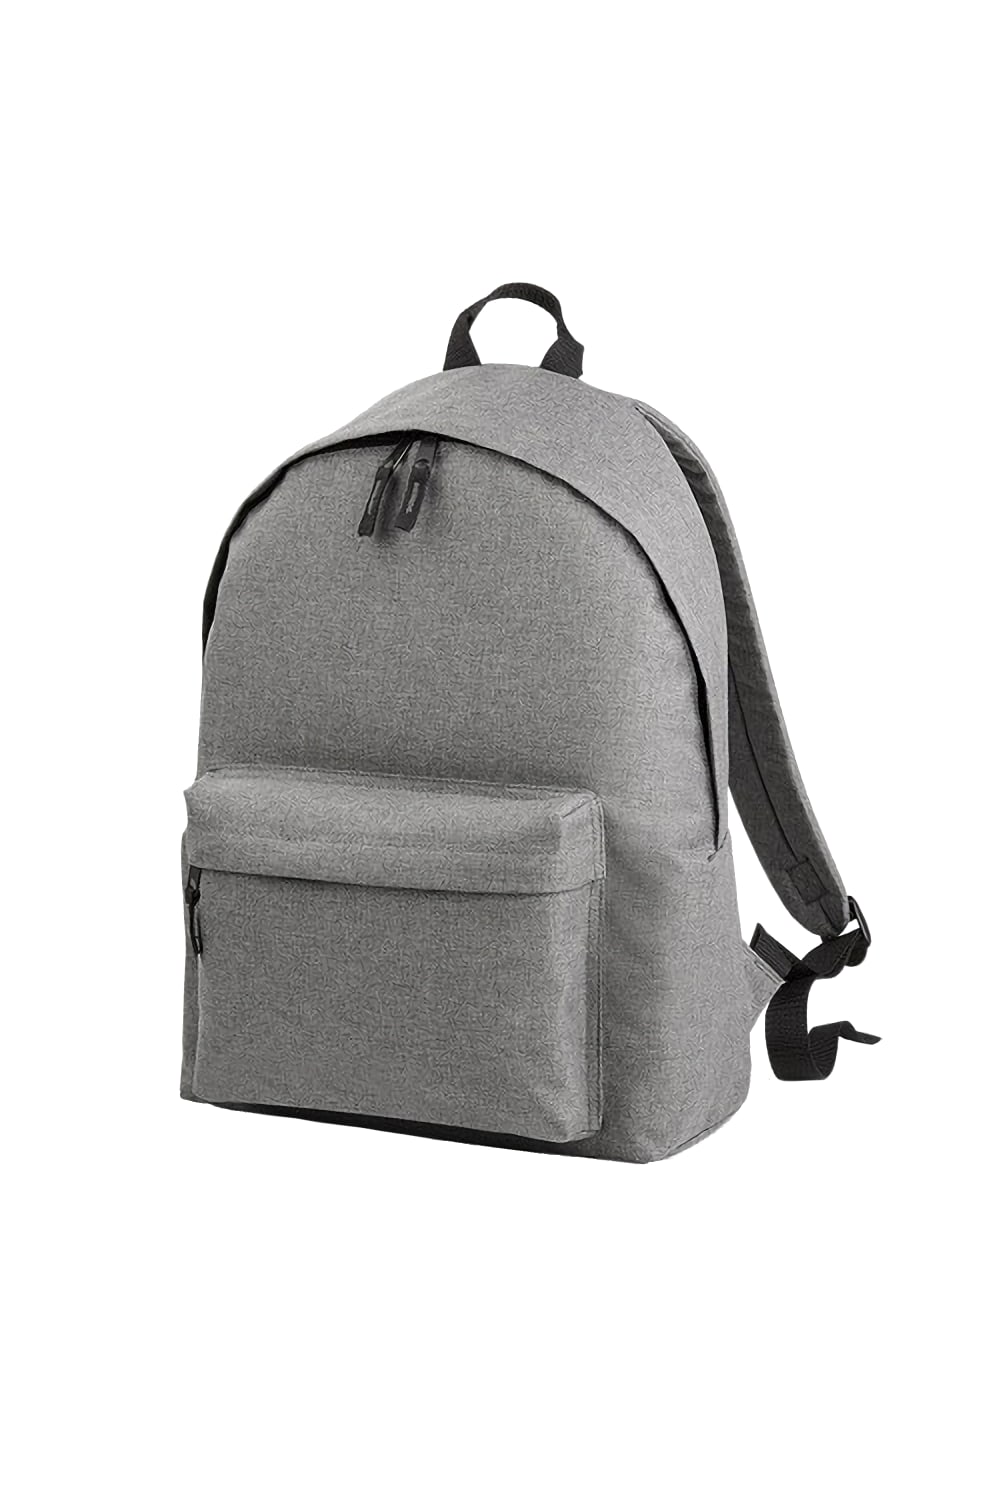 Rucksack Two Tone Fashion Backpack Bag, 18 Litres Pack Of 2 - Grey Marl